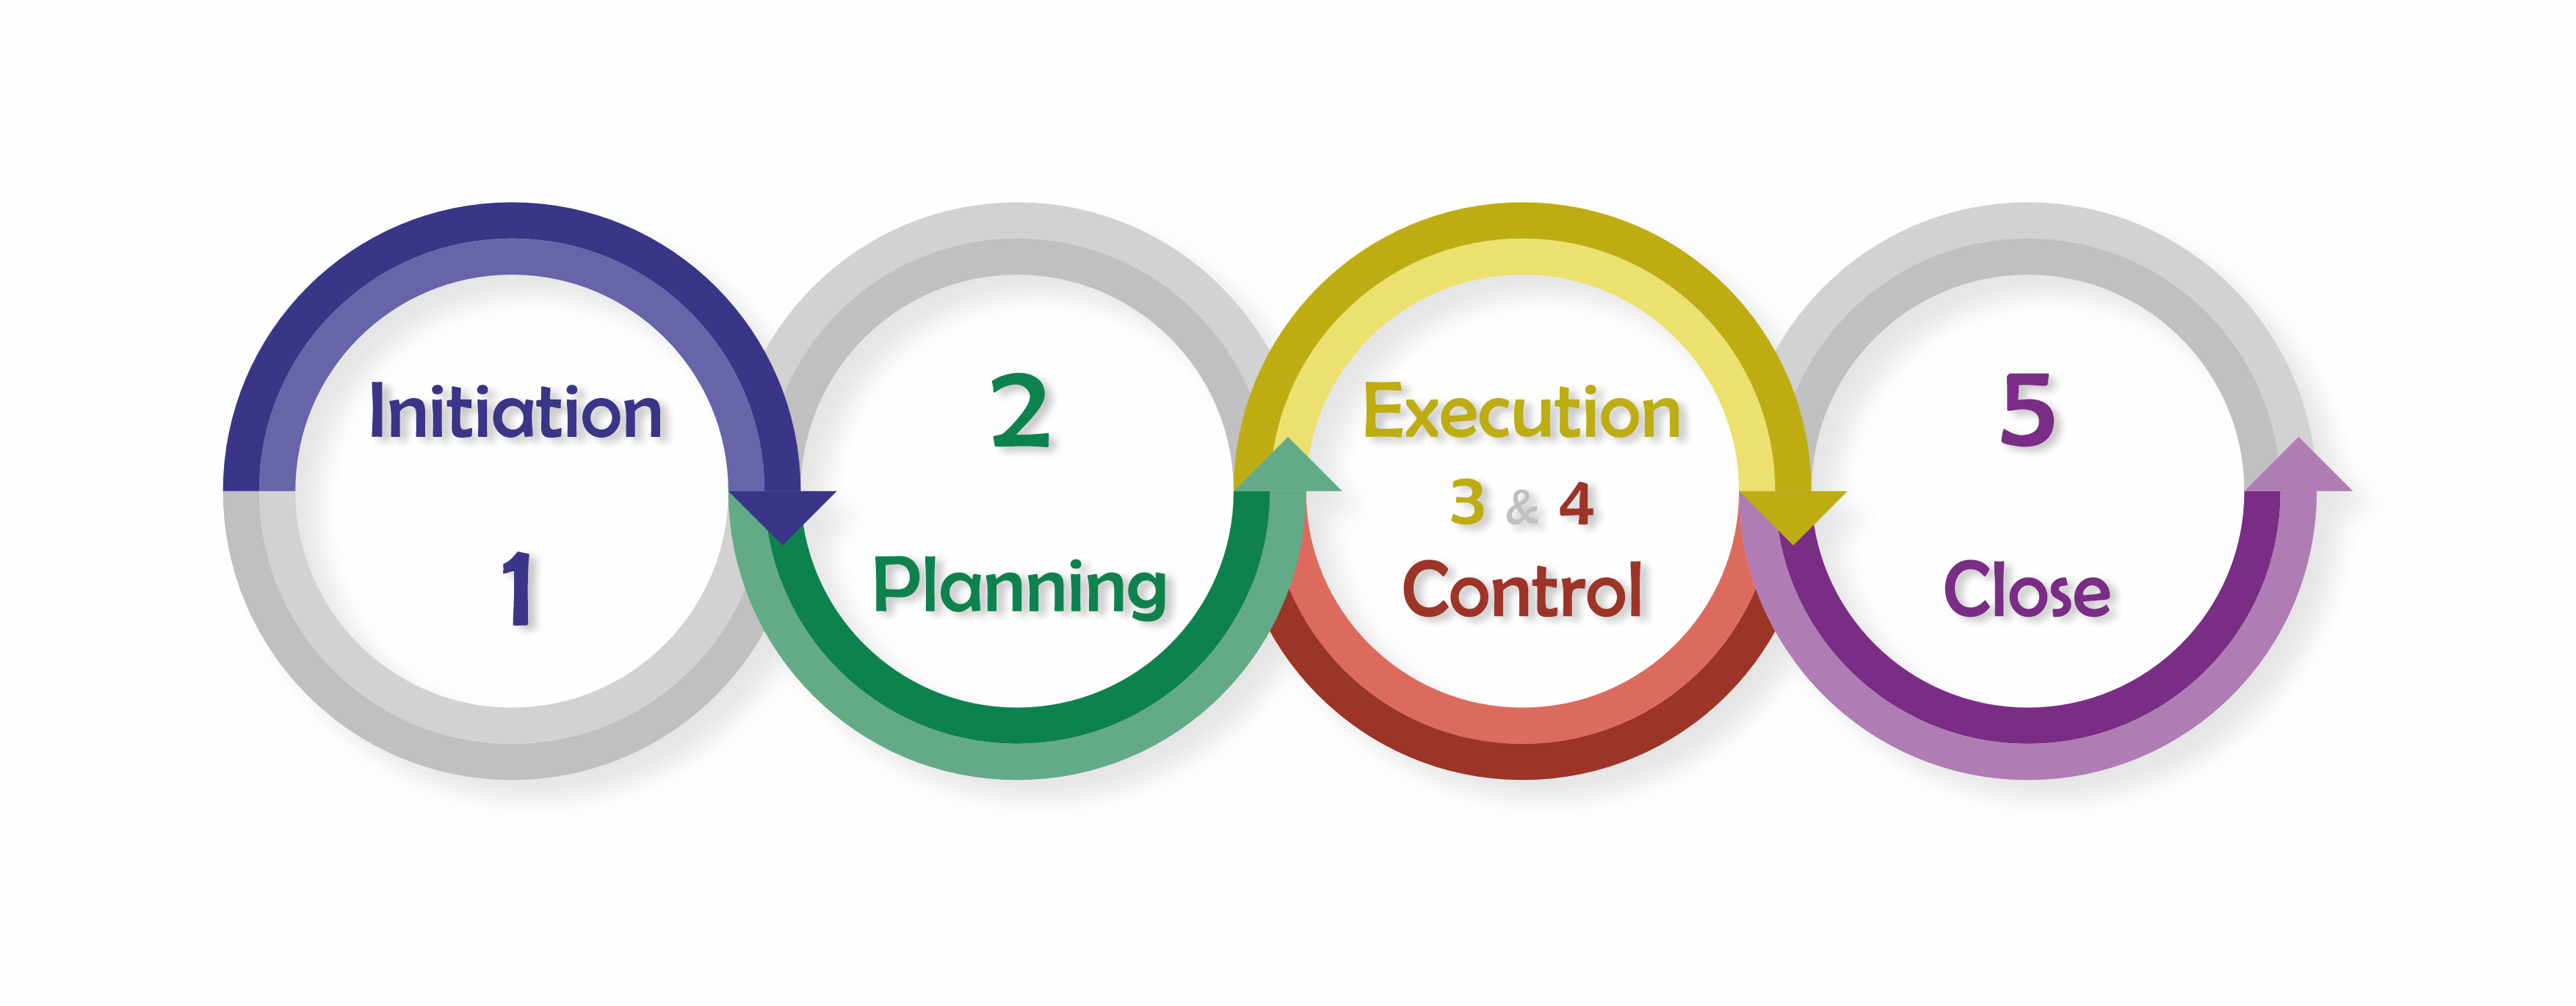 The 5 Stages of Project Management - Kanbanchi